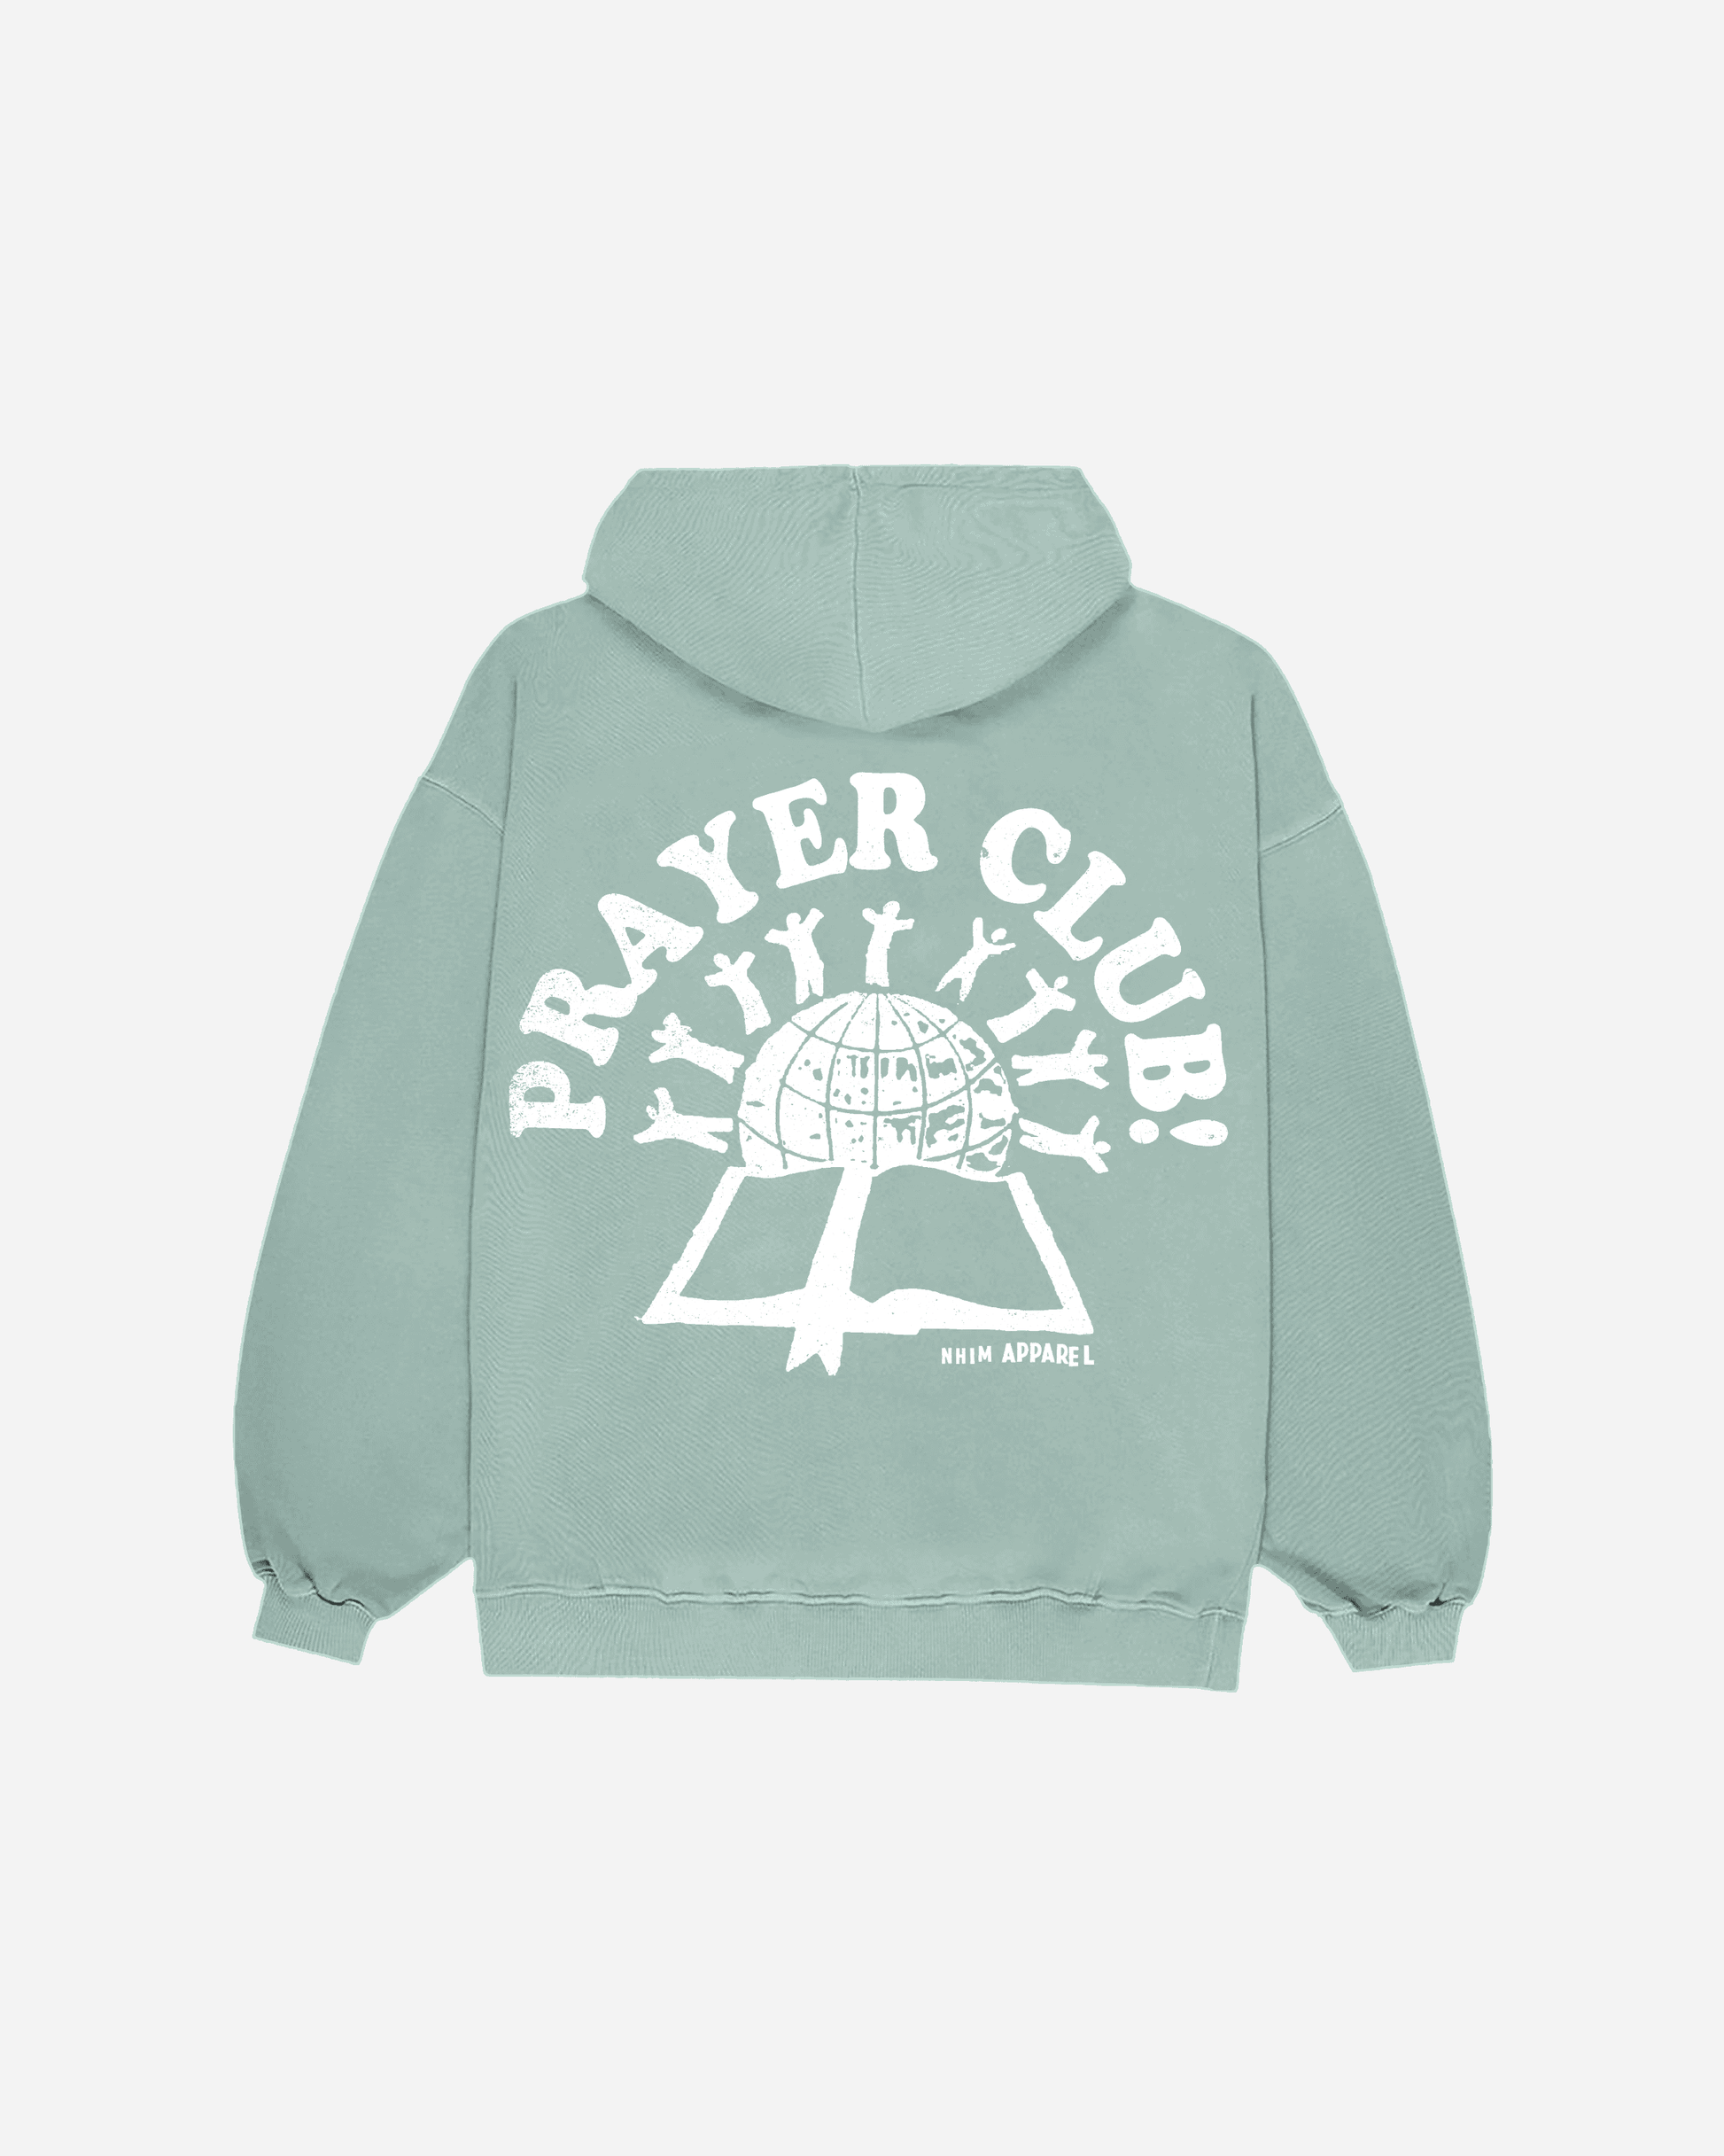 Prayer Club seafoam green colored hooded sweatshirt with white graphic of people on the world with a bible made by NHIM APPAREL christian clothing brand